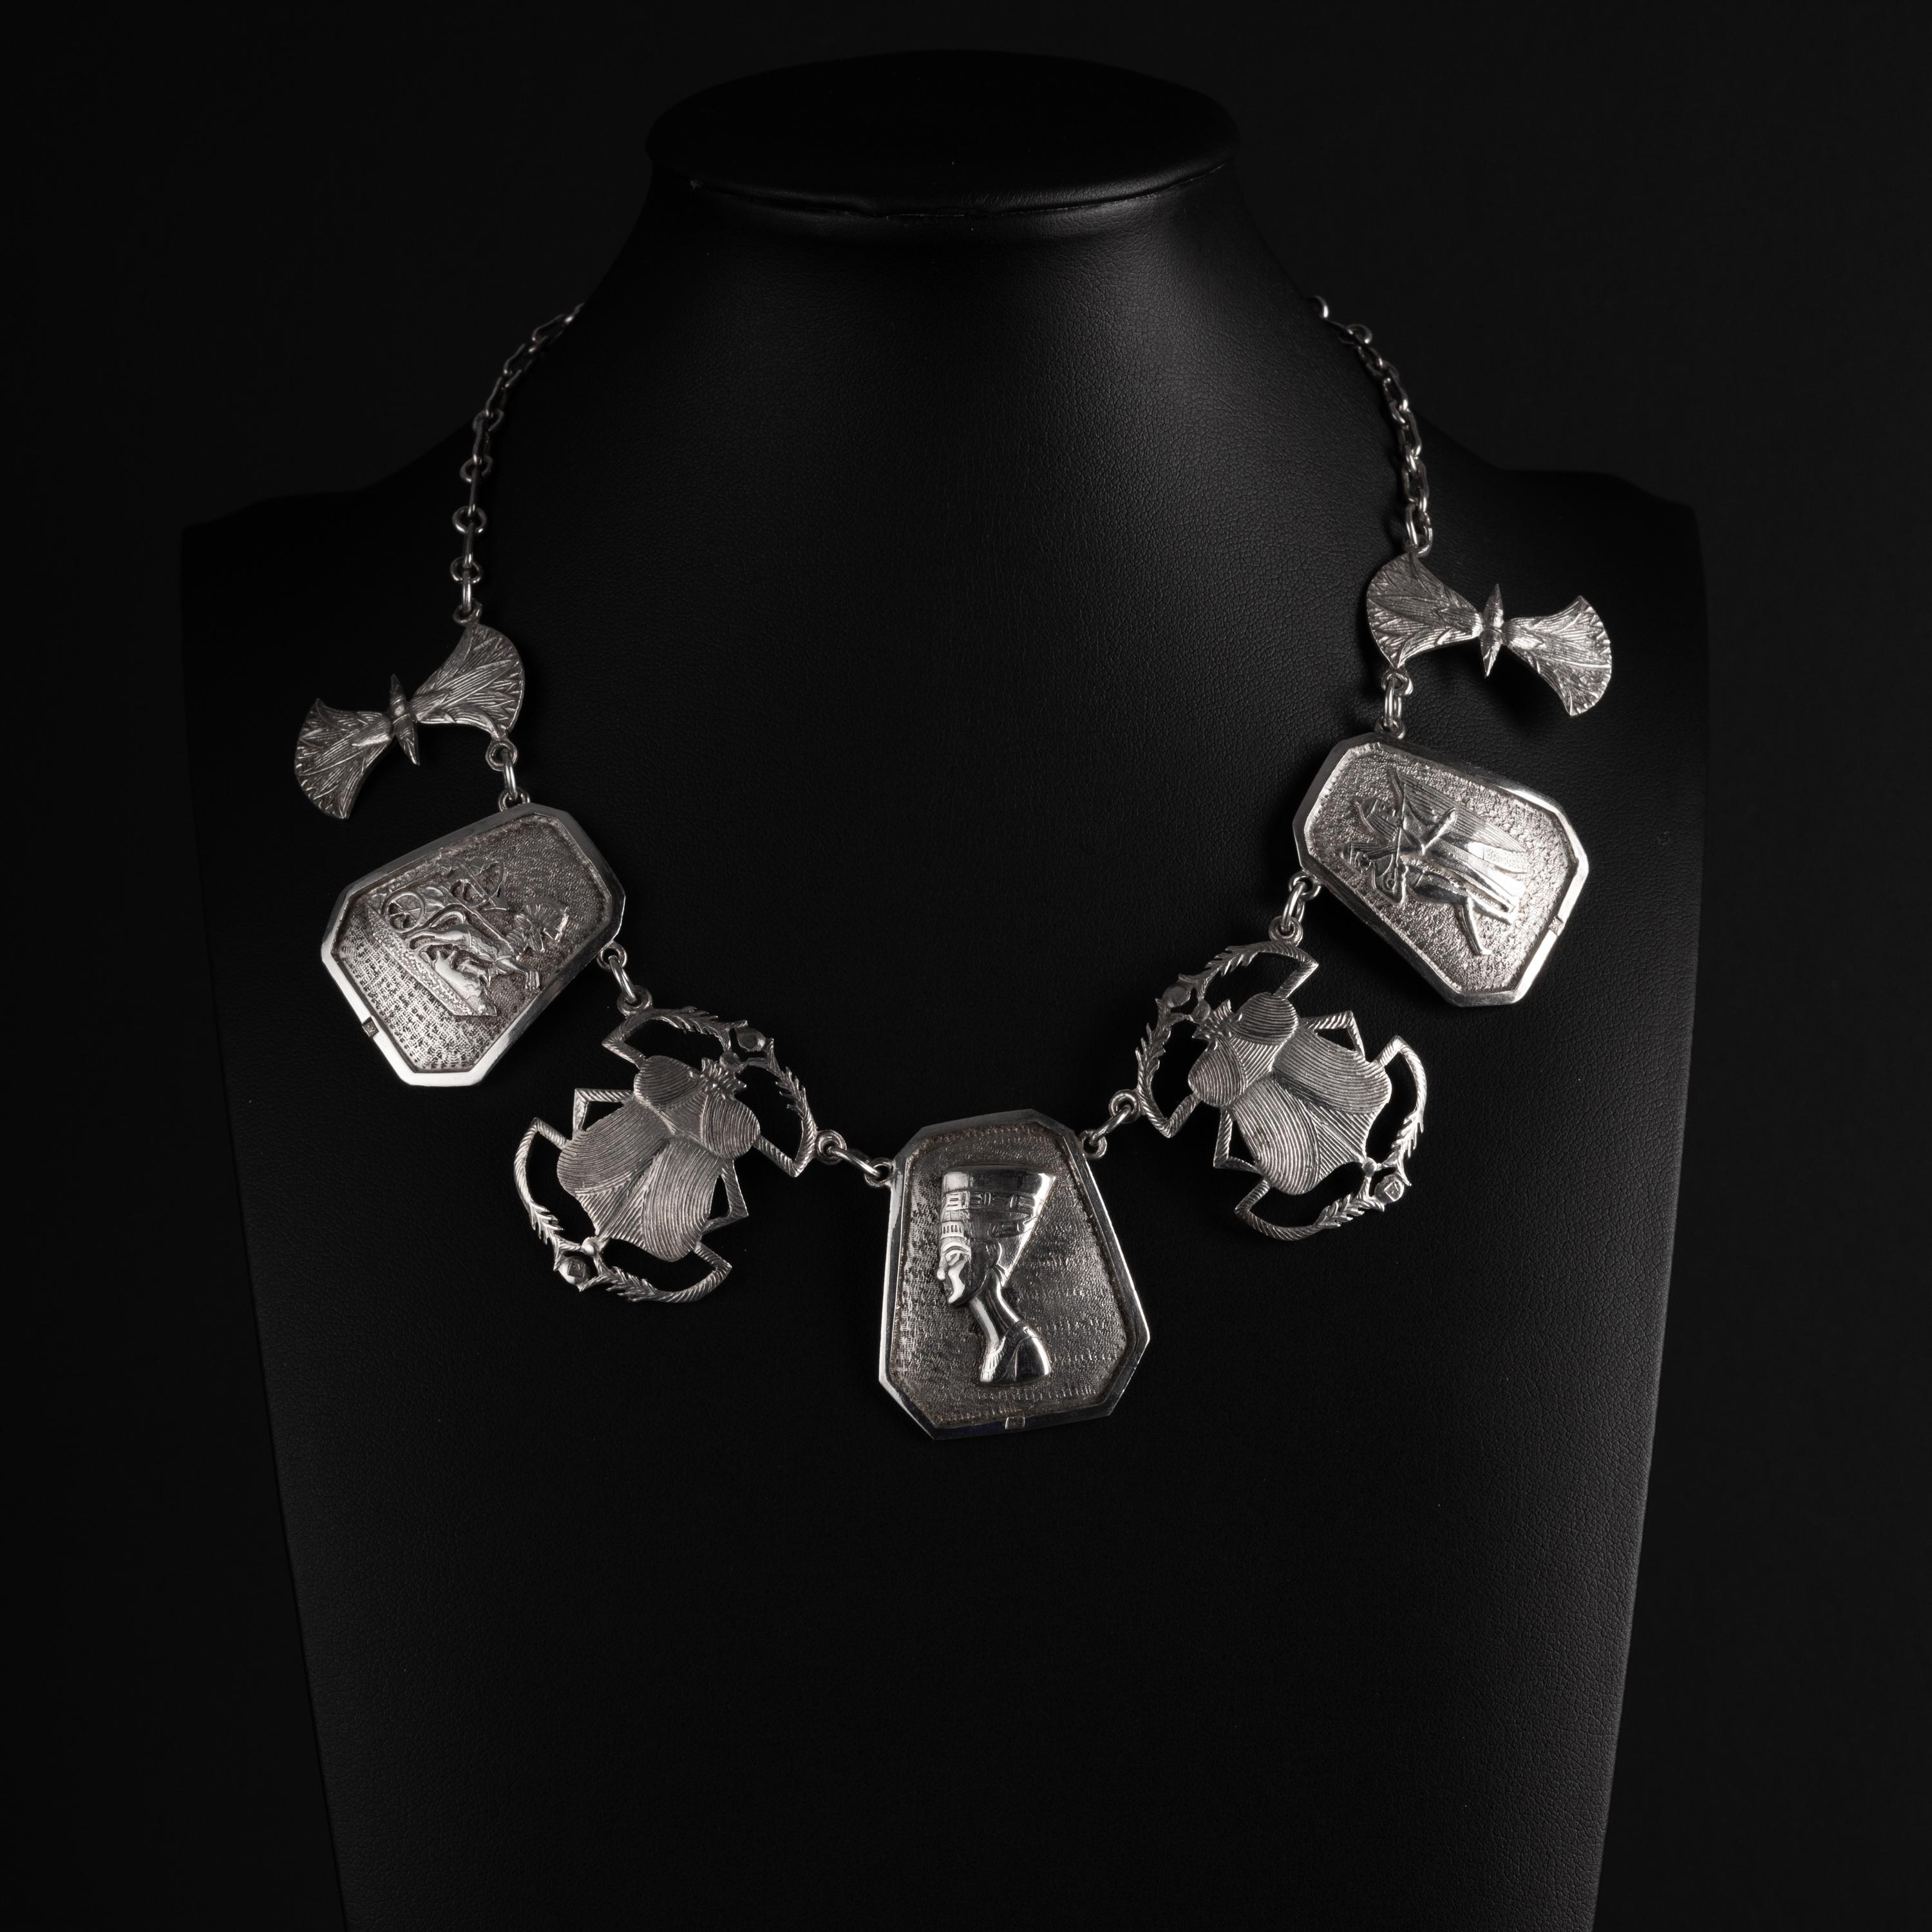 This unique, dramatic necklace was created from sterling silver early in the twentieth century —near 1920— at the height of the Egyptian Revival period. The necklace features 7 silver plaques, each of which is highly detailed, depicting war, music,